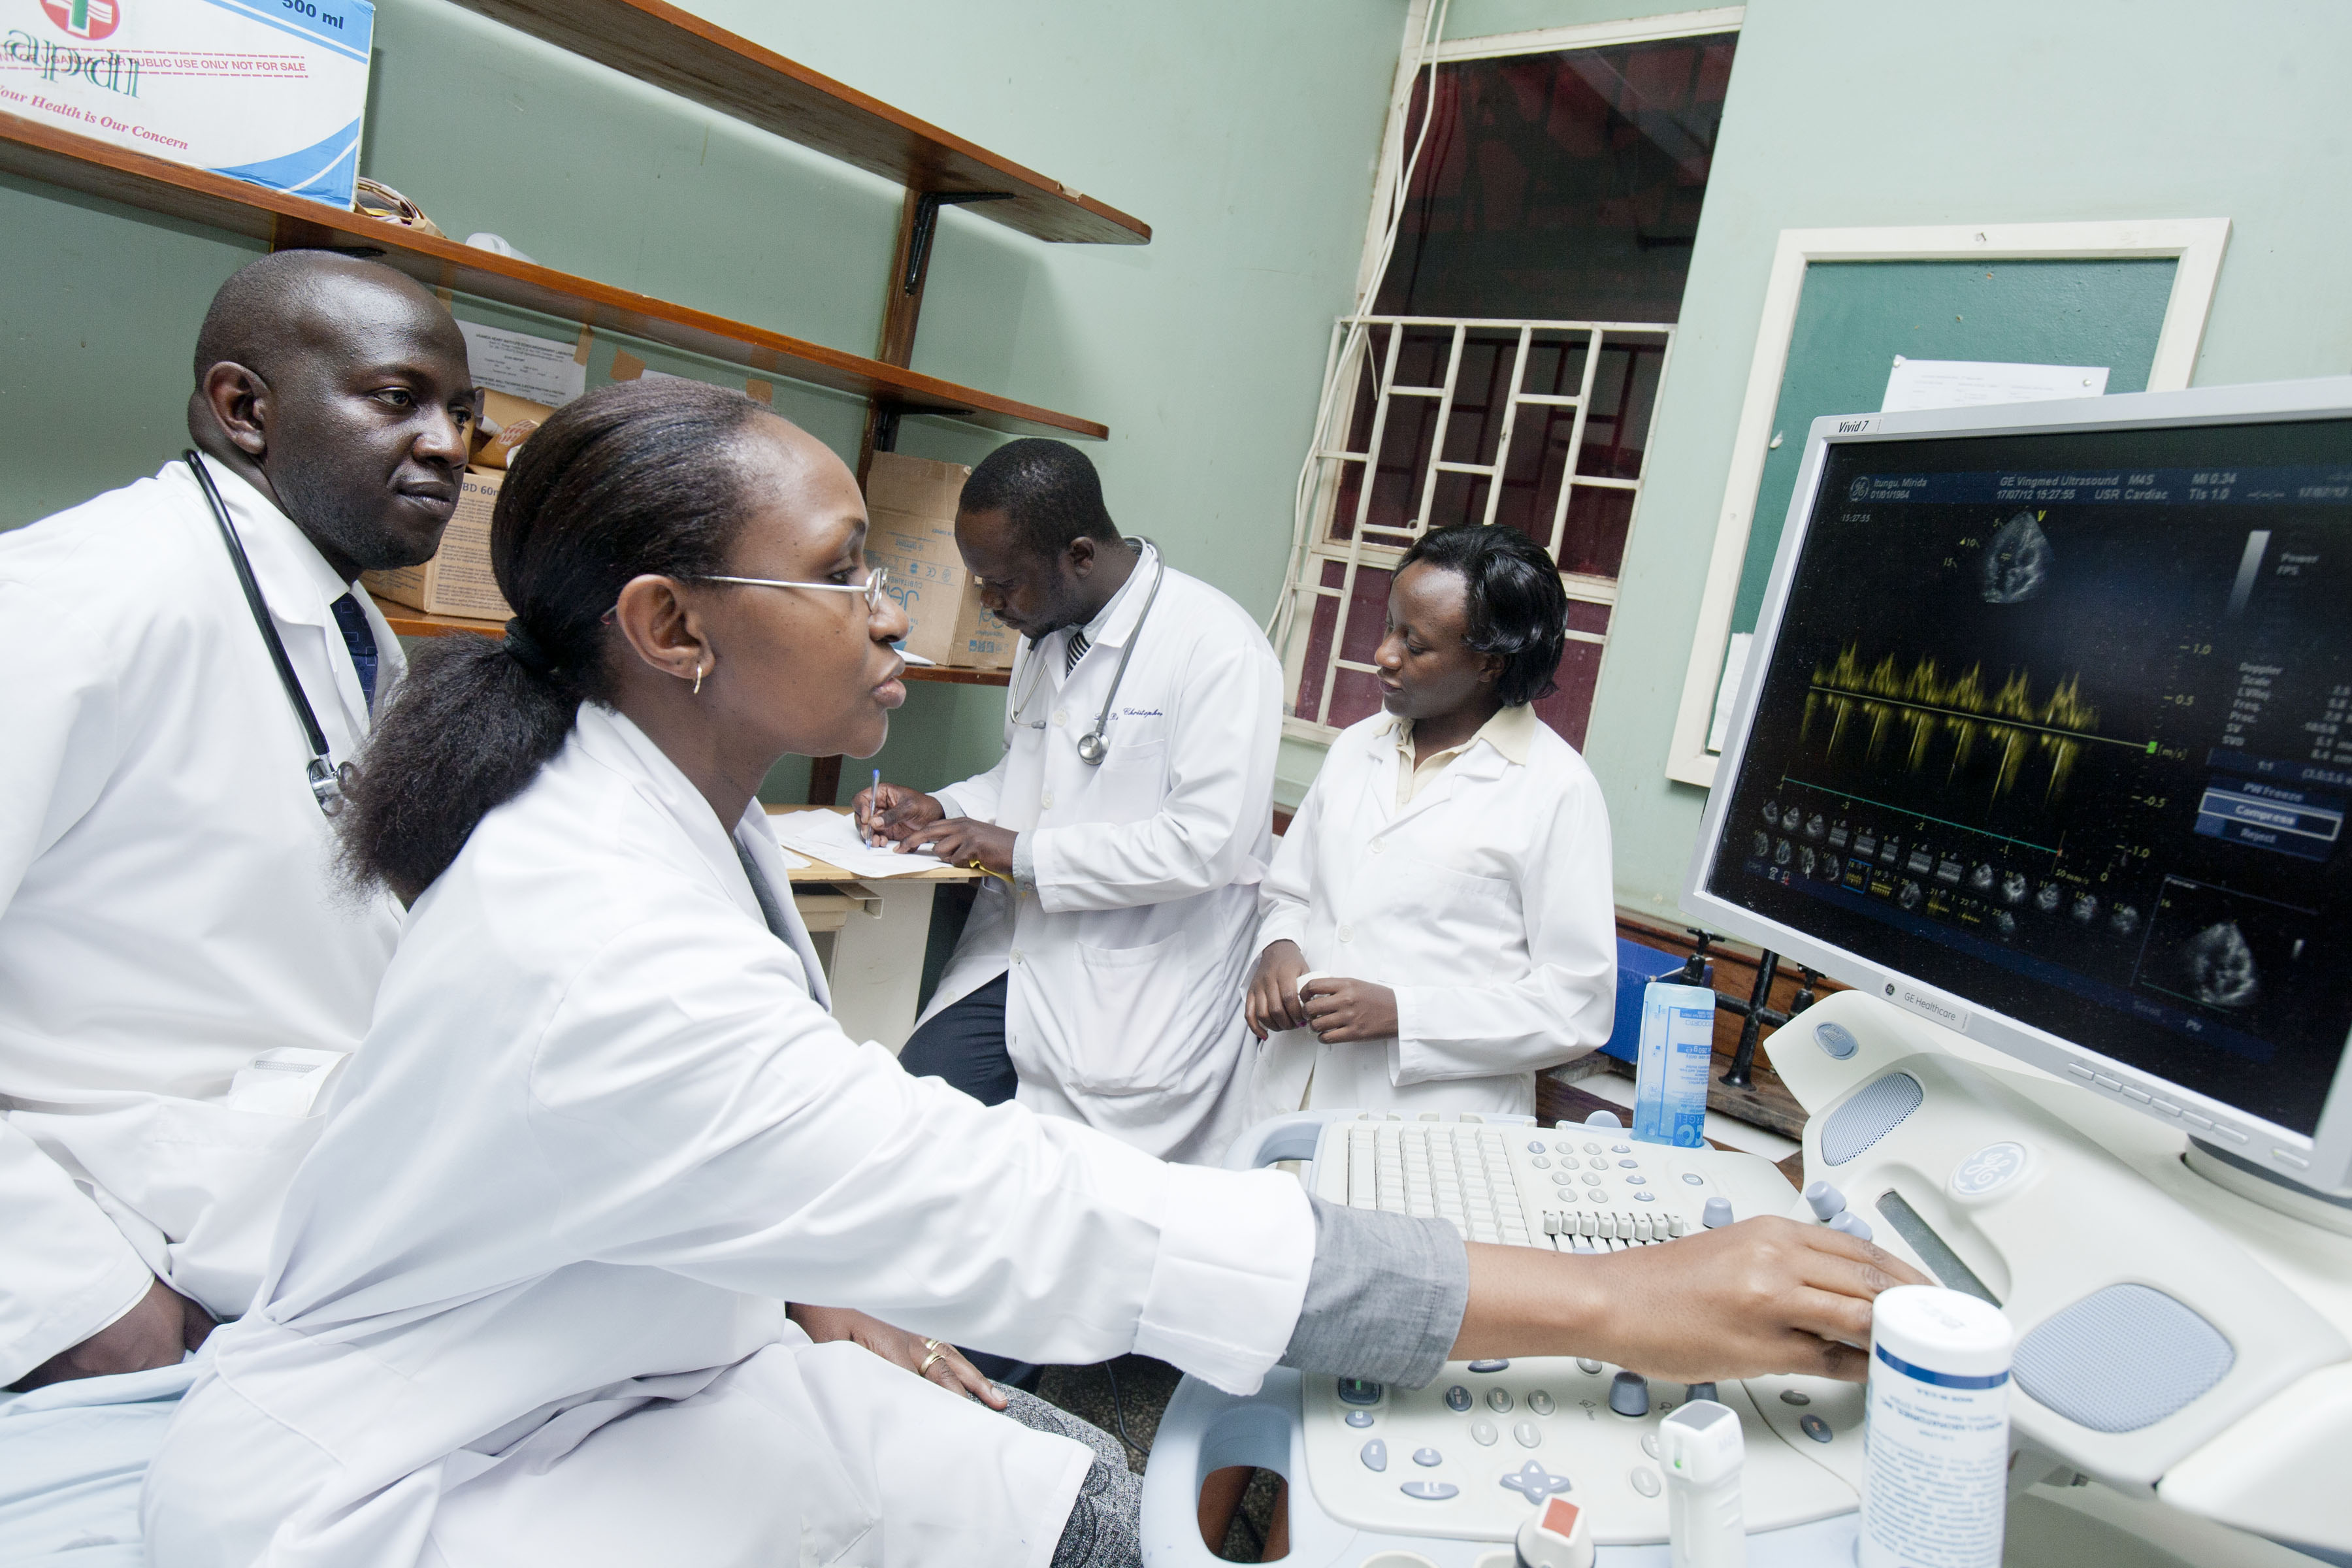 With MEPI support, Makerere University medical students learn to leverage technology to improve care and research (image: Richard Lord for Fogarty/NIH)